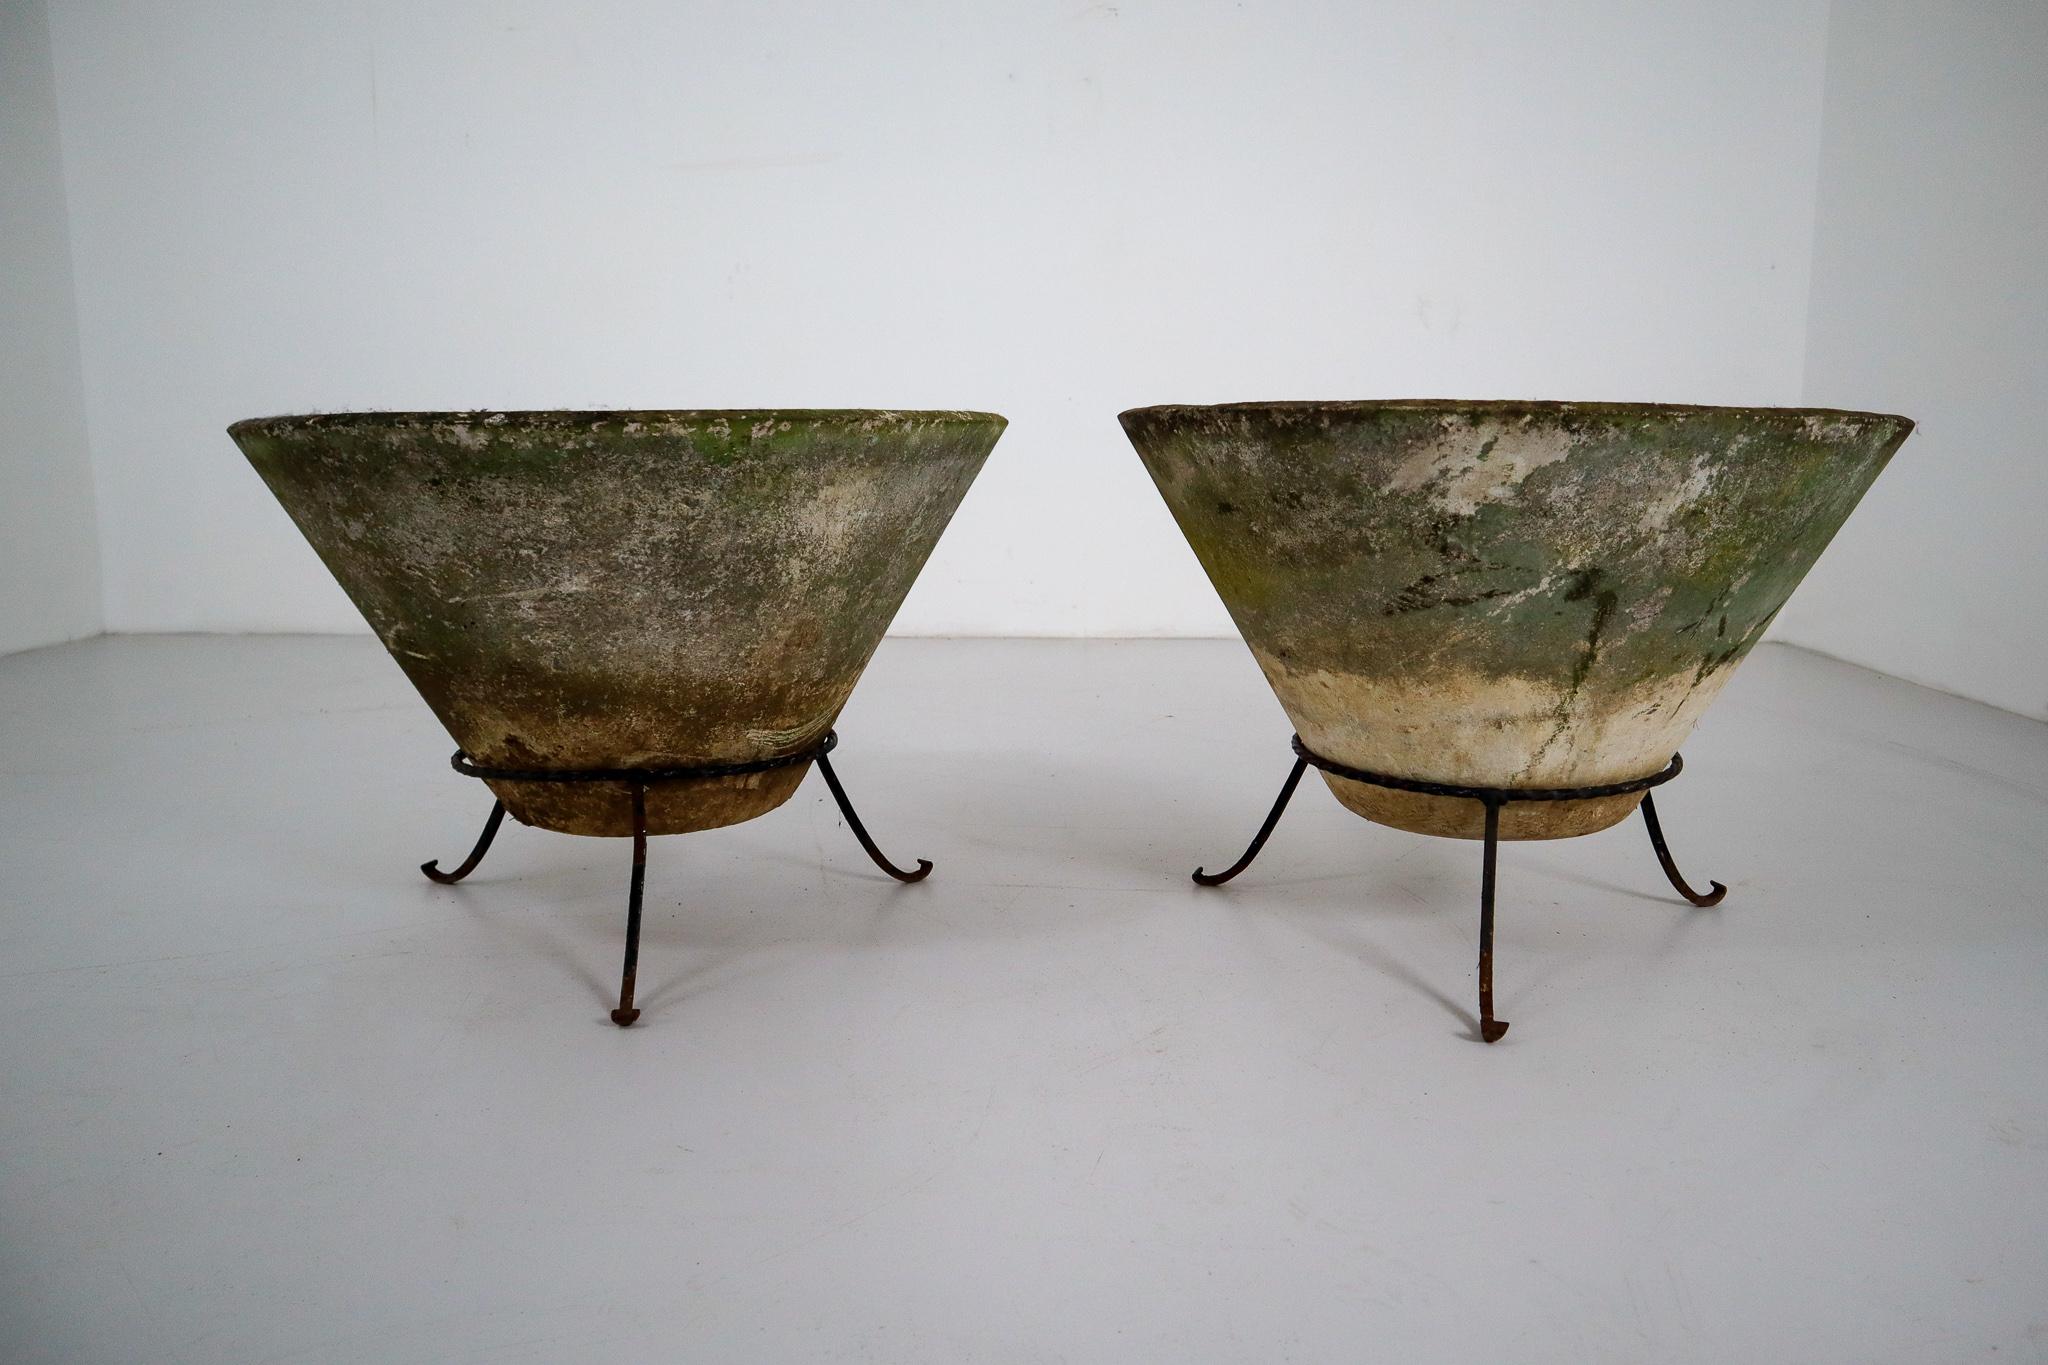 A set of two Mid-Century Modern large saucer planters of composition stone for an indoor or outdoor garden, garden room, or terrace, designed by the iconic Willy Guhl in the early 1960s. They have a lovely naturally-weathered surface.